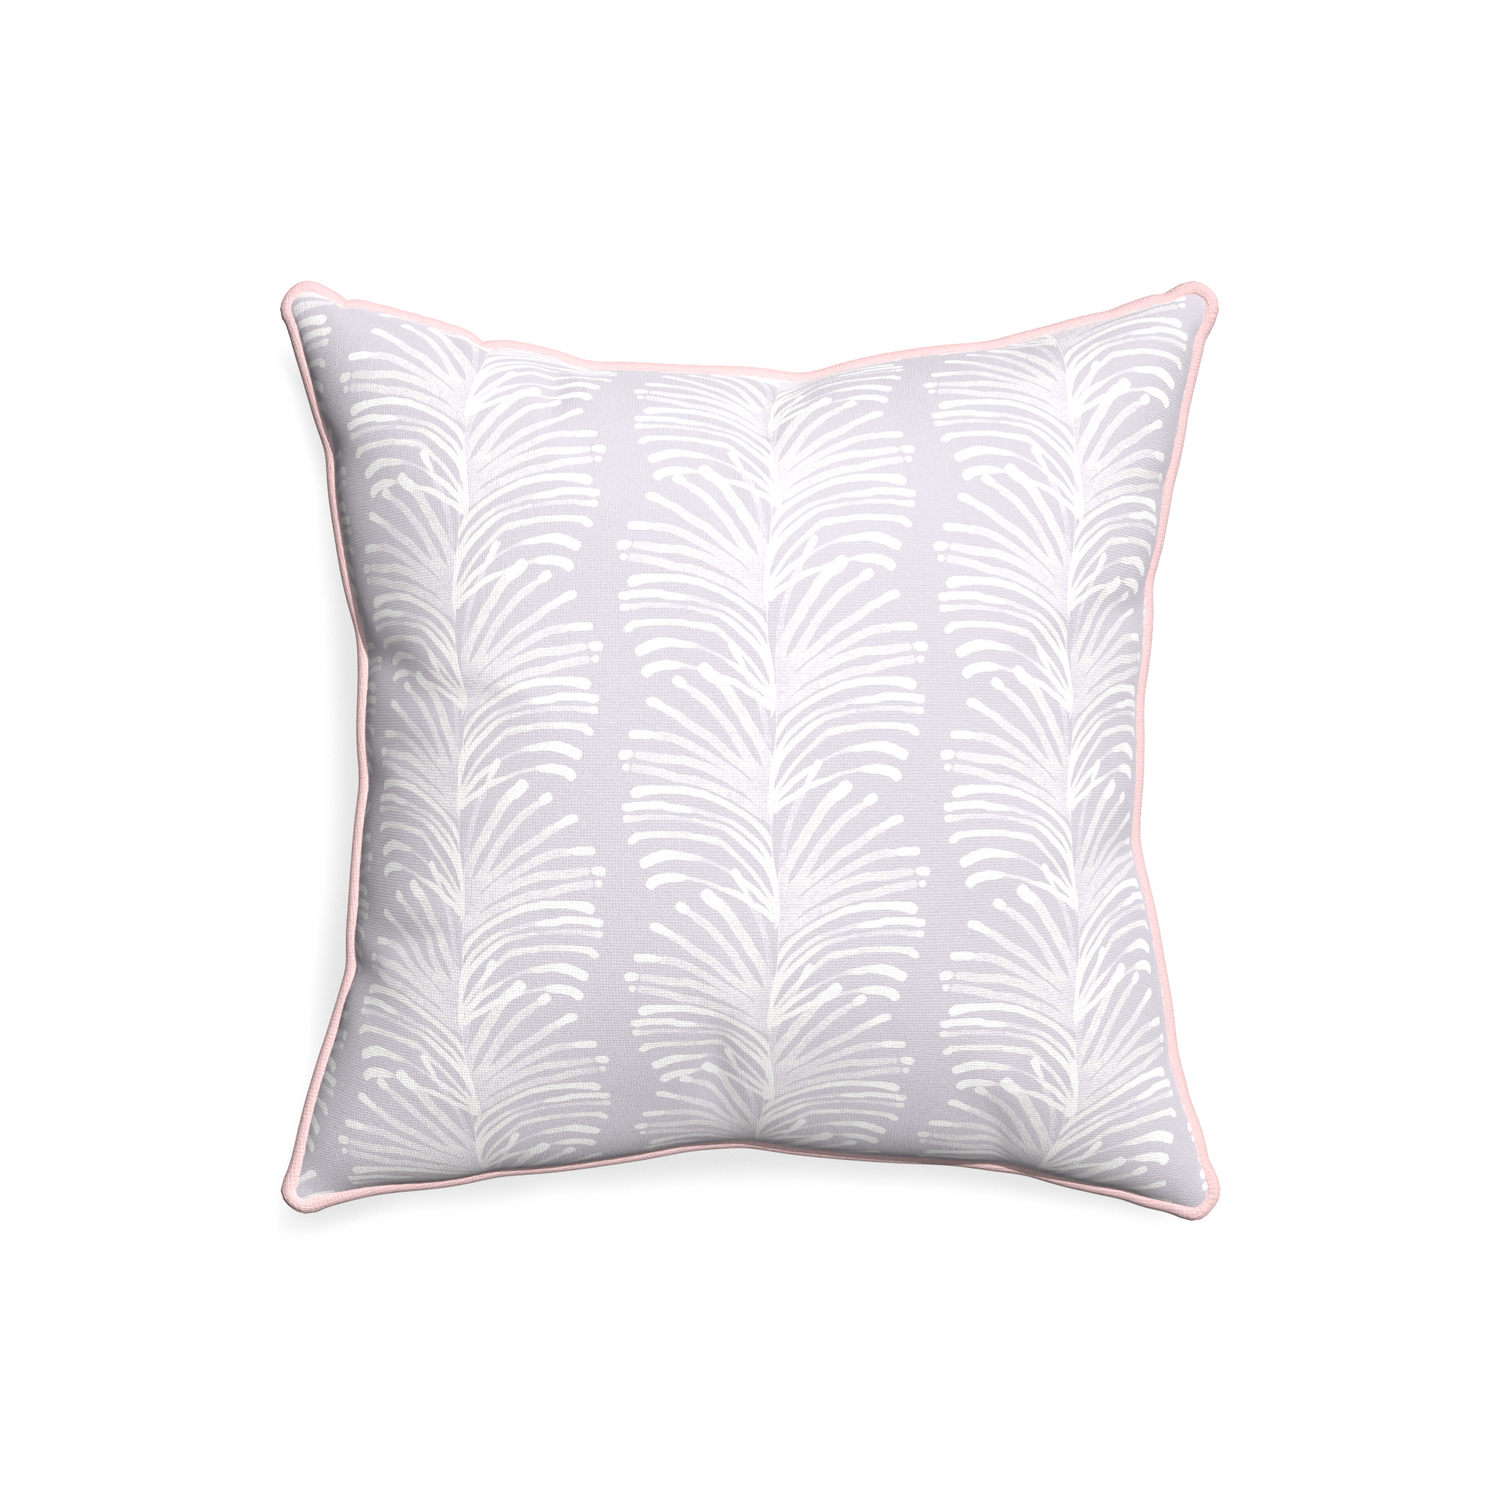 20-square emma lavender custom lavender botanical stripepillow with petal piping on white background